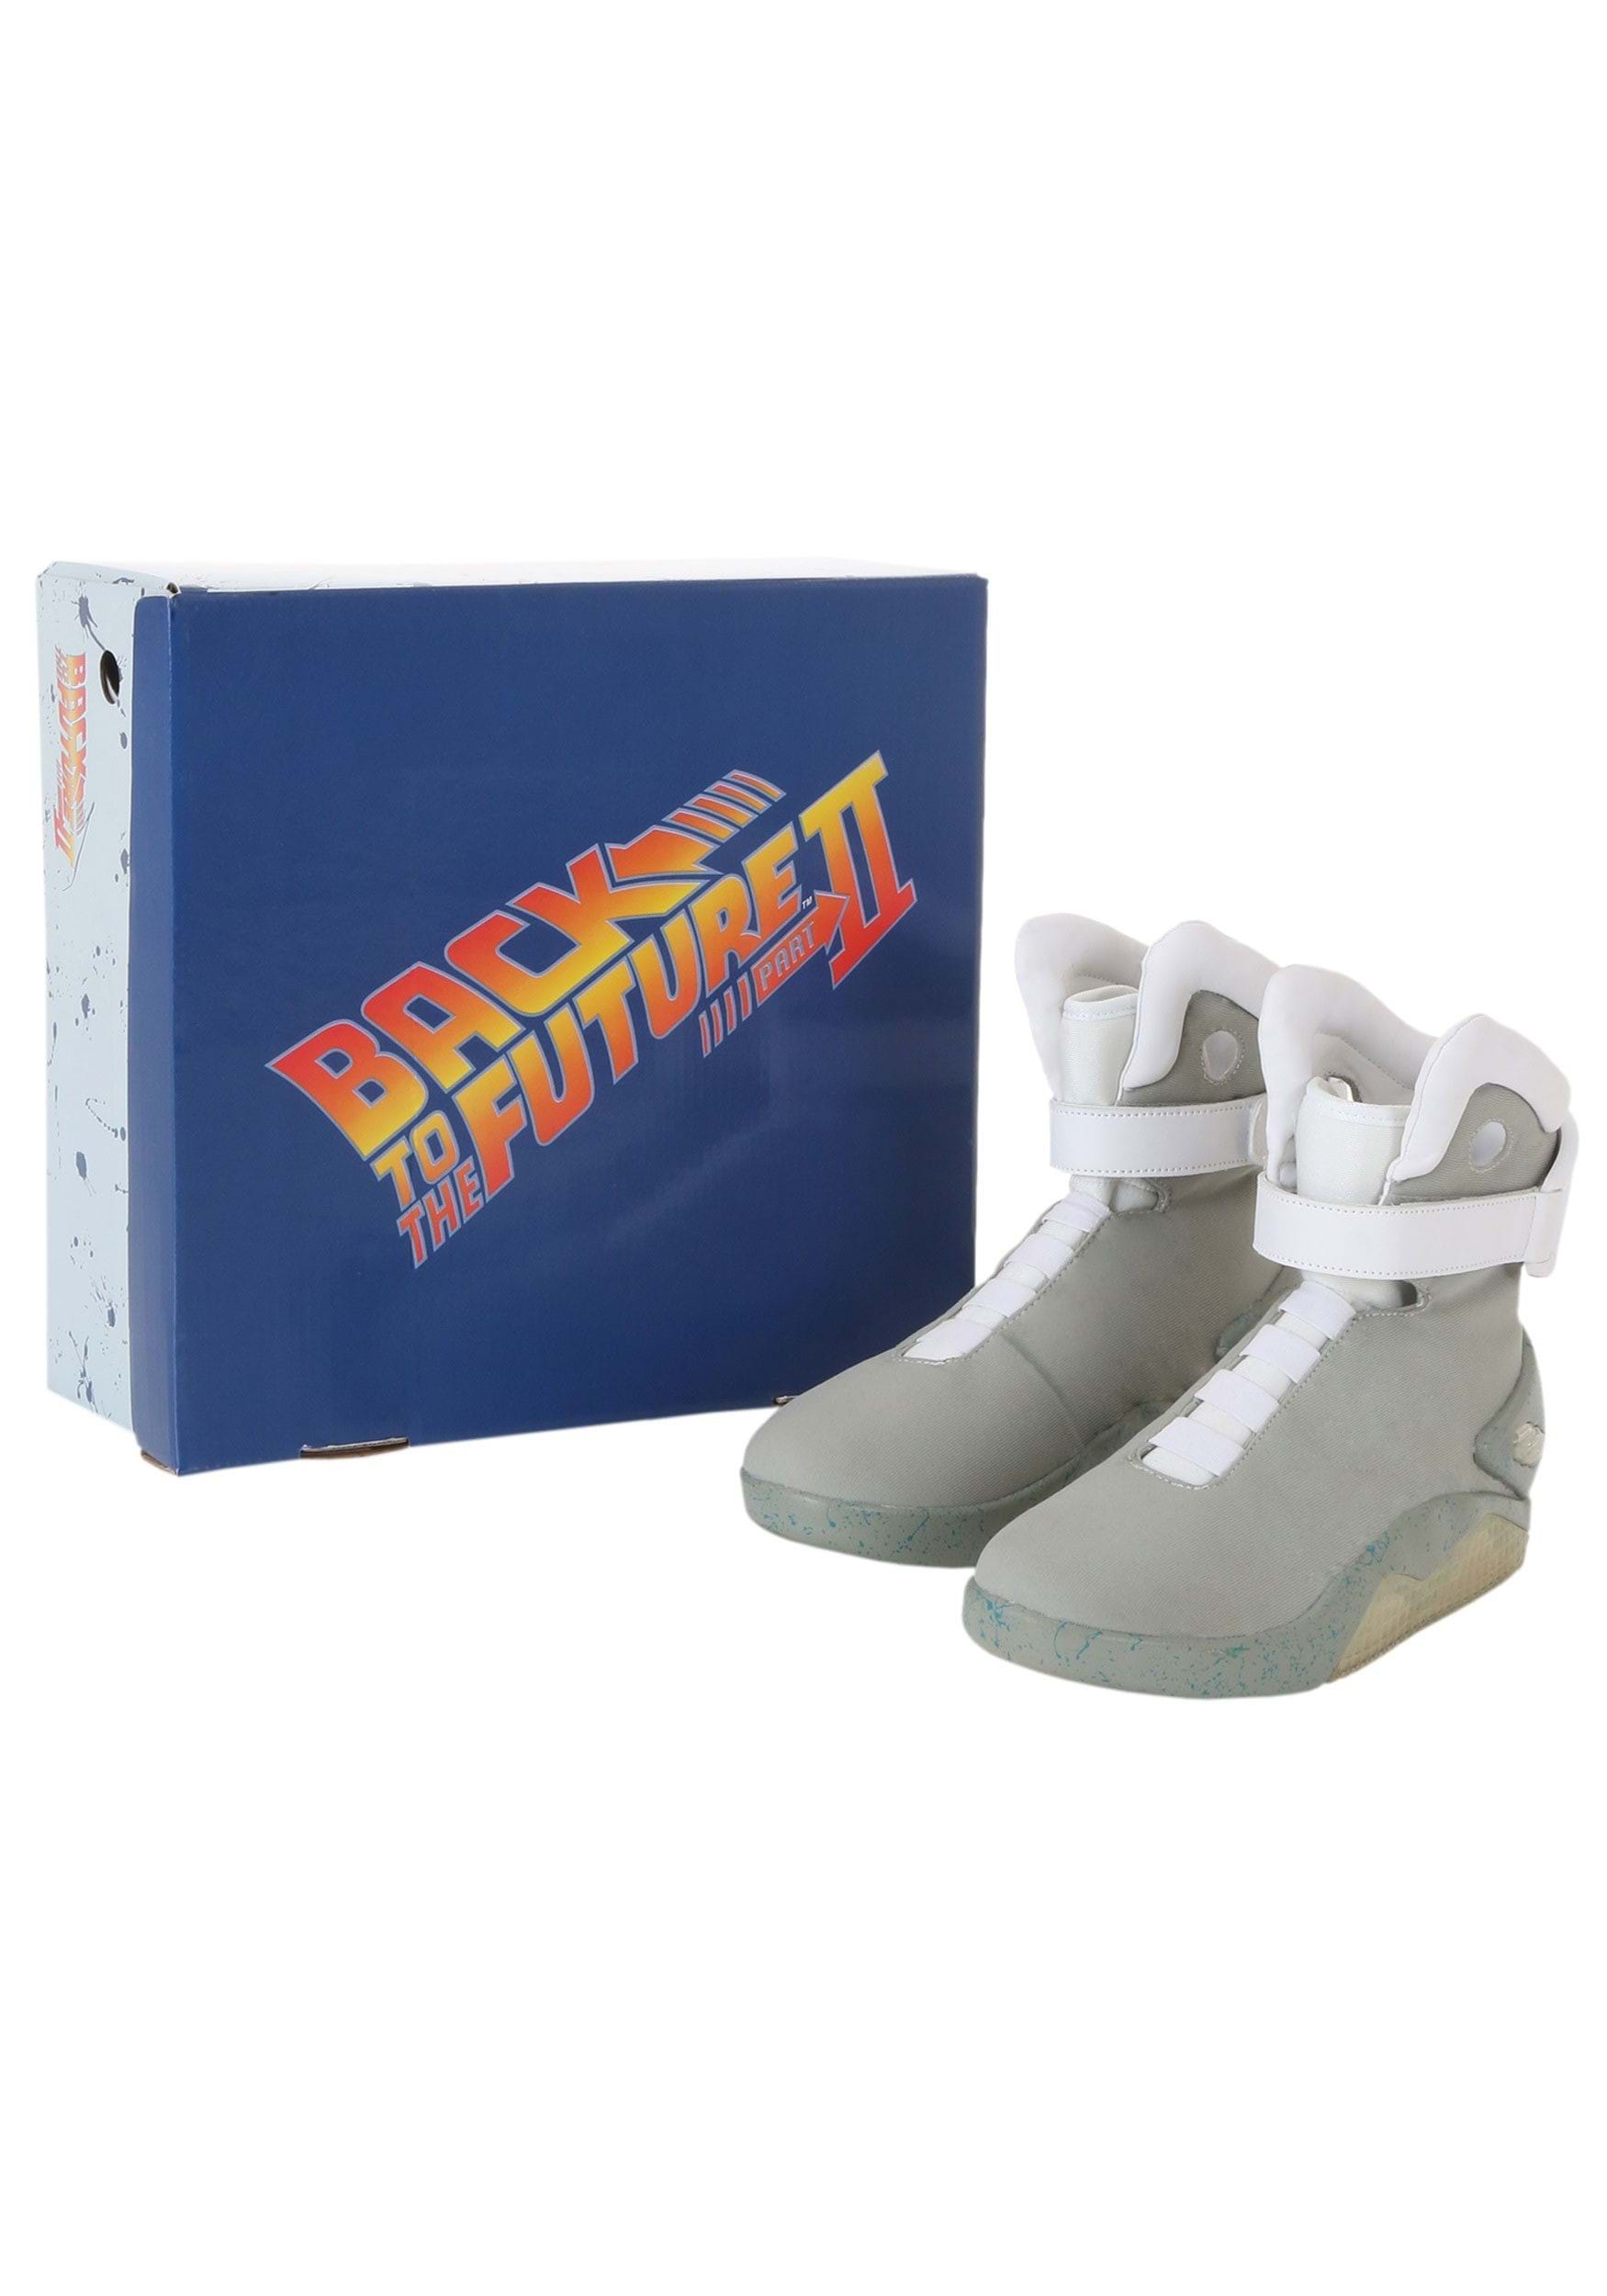 Back To The Future Part II Light Up Shoes